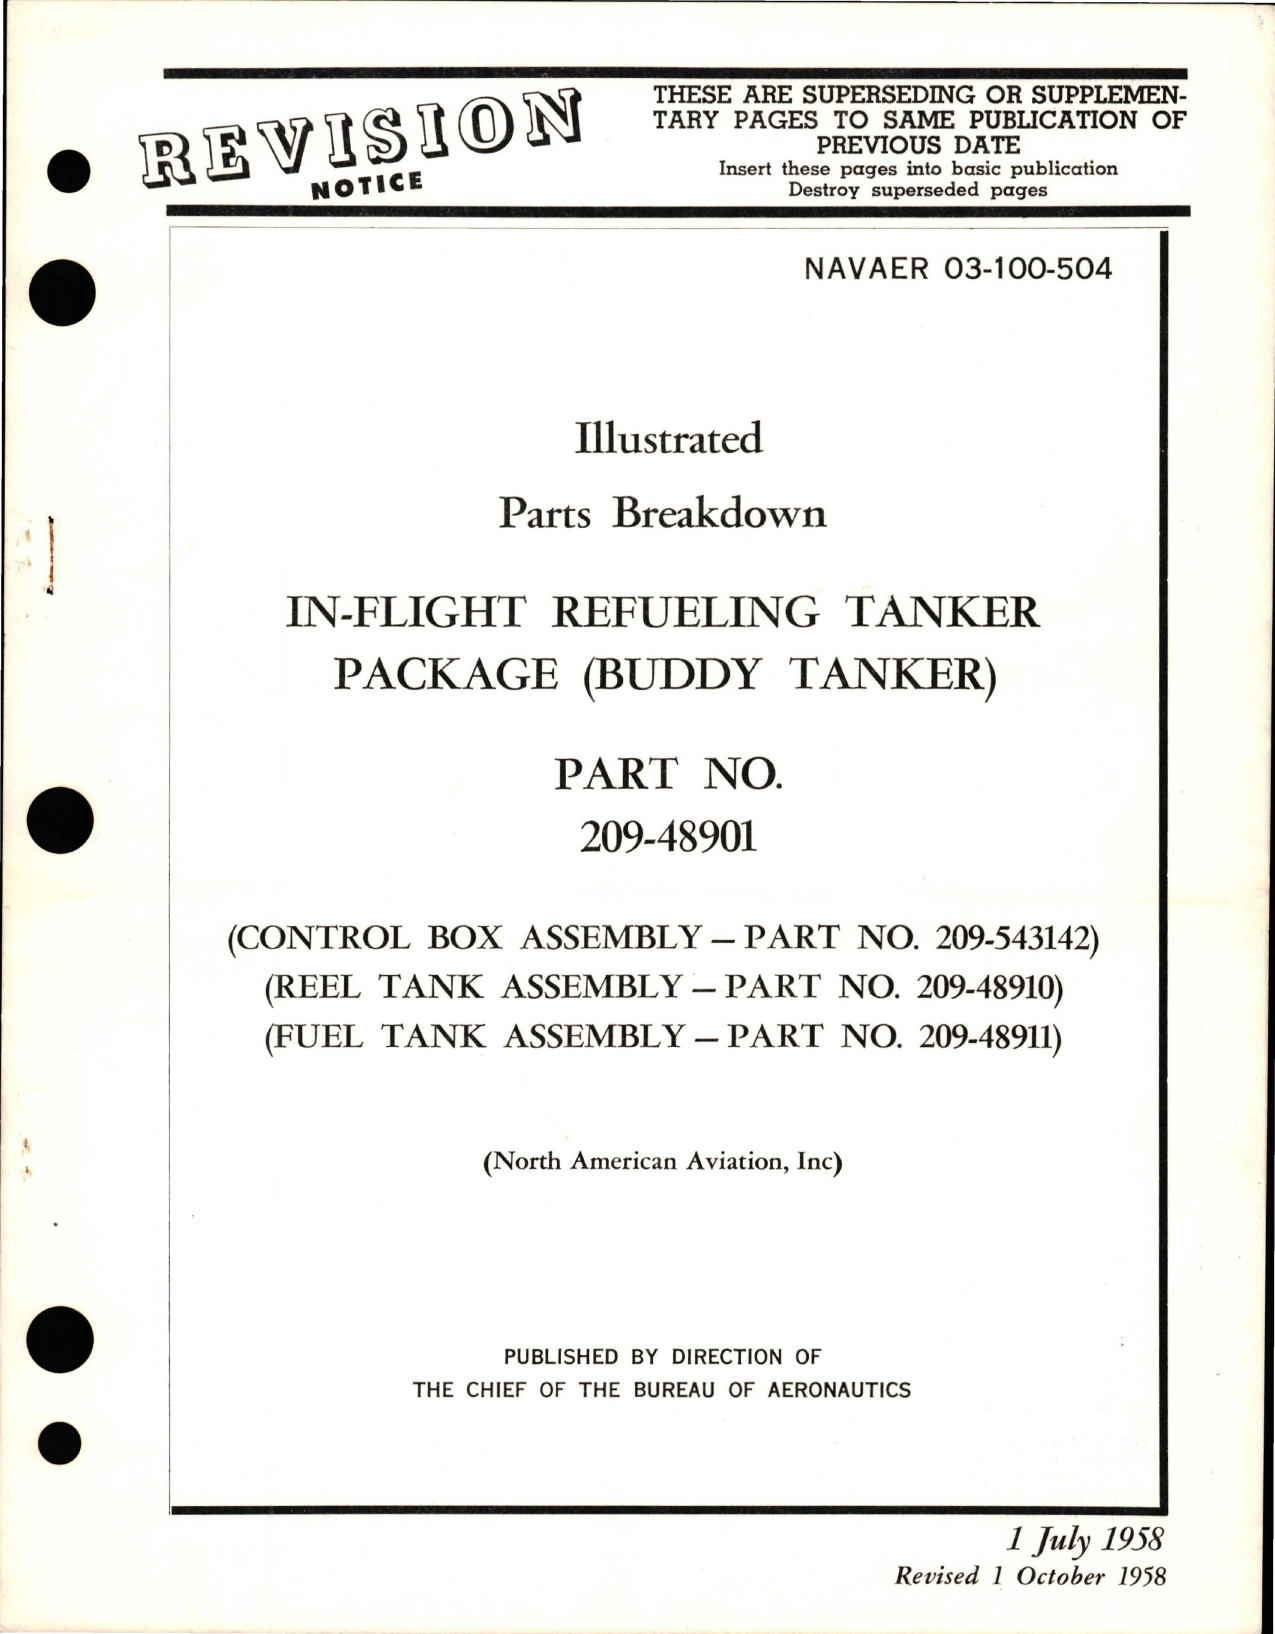 Sample page 1 from AirCorps Library document: Illustrated Parts Breakdown for In-Flight Refueling Tanker Package (Buddy Tanker) - Part 209-48901